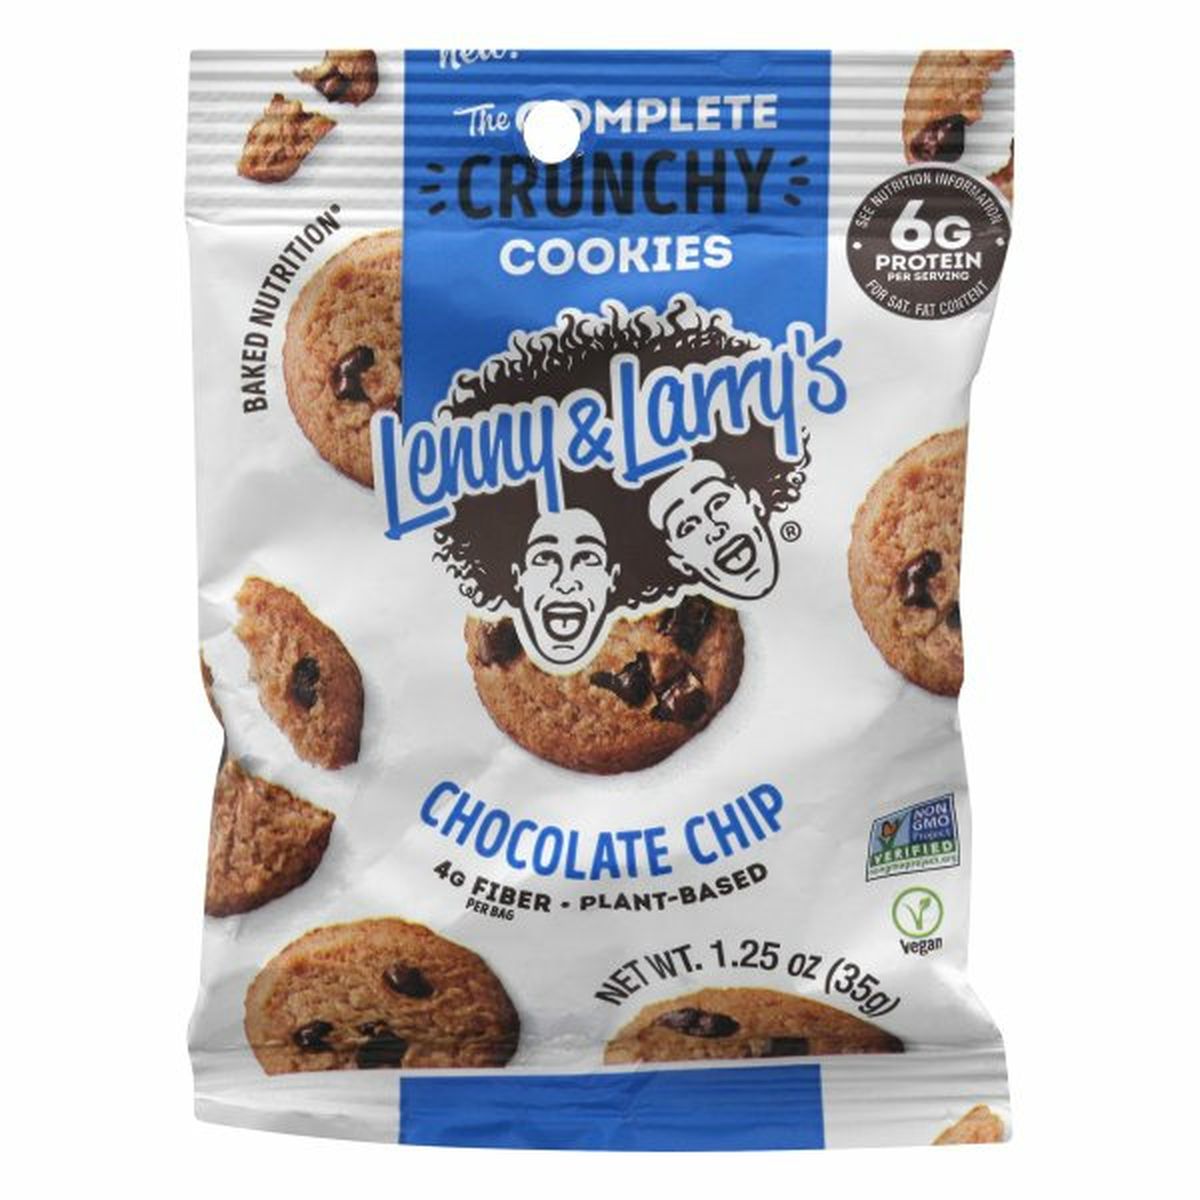 Calories in Lenny & Larry's The Complete Crunchy Cookies, Chocolate Chip